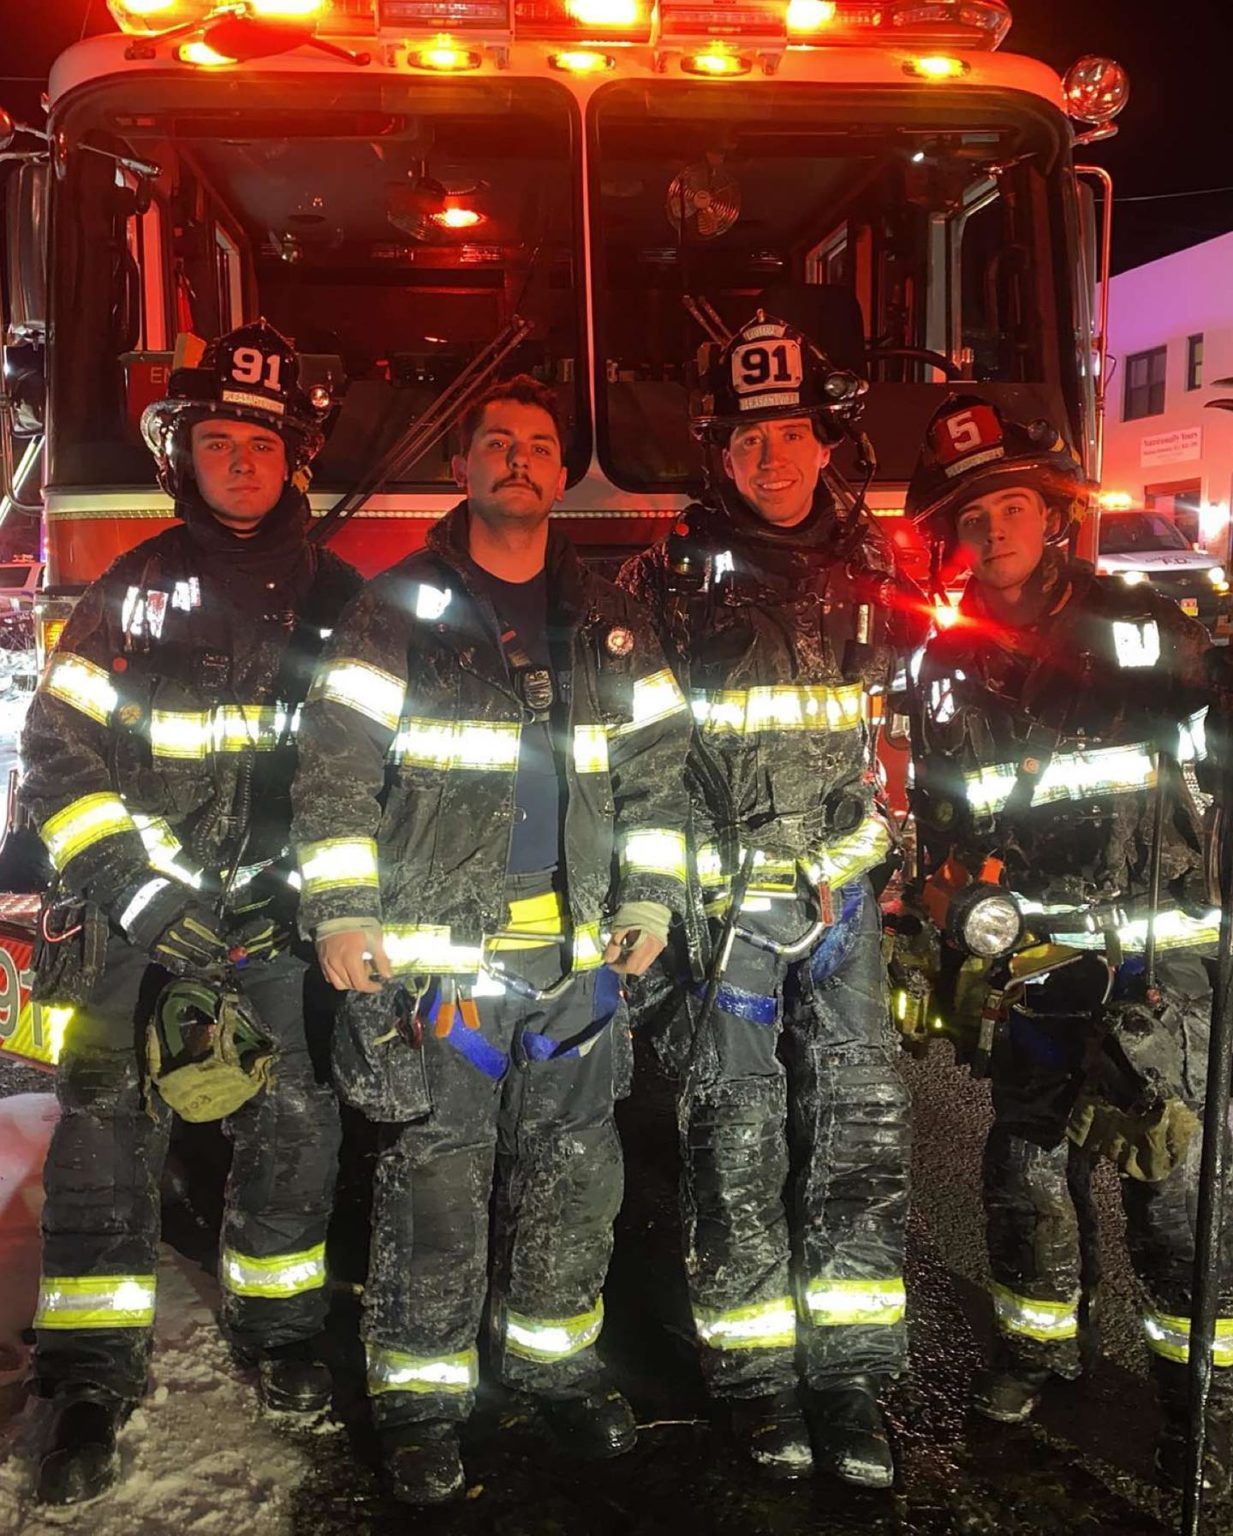 volunteer firefighters posed in front of truck at night